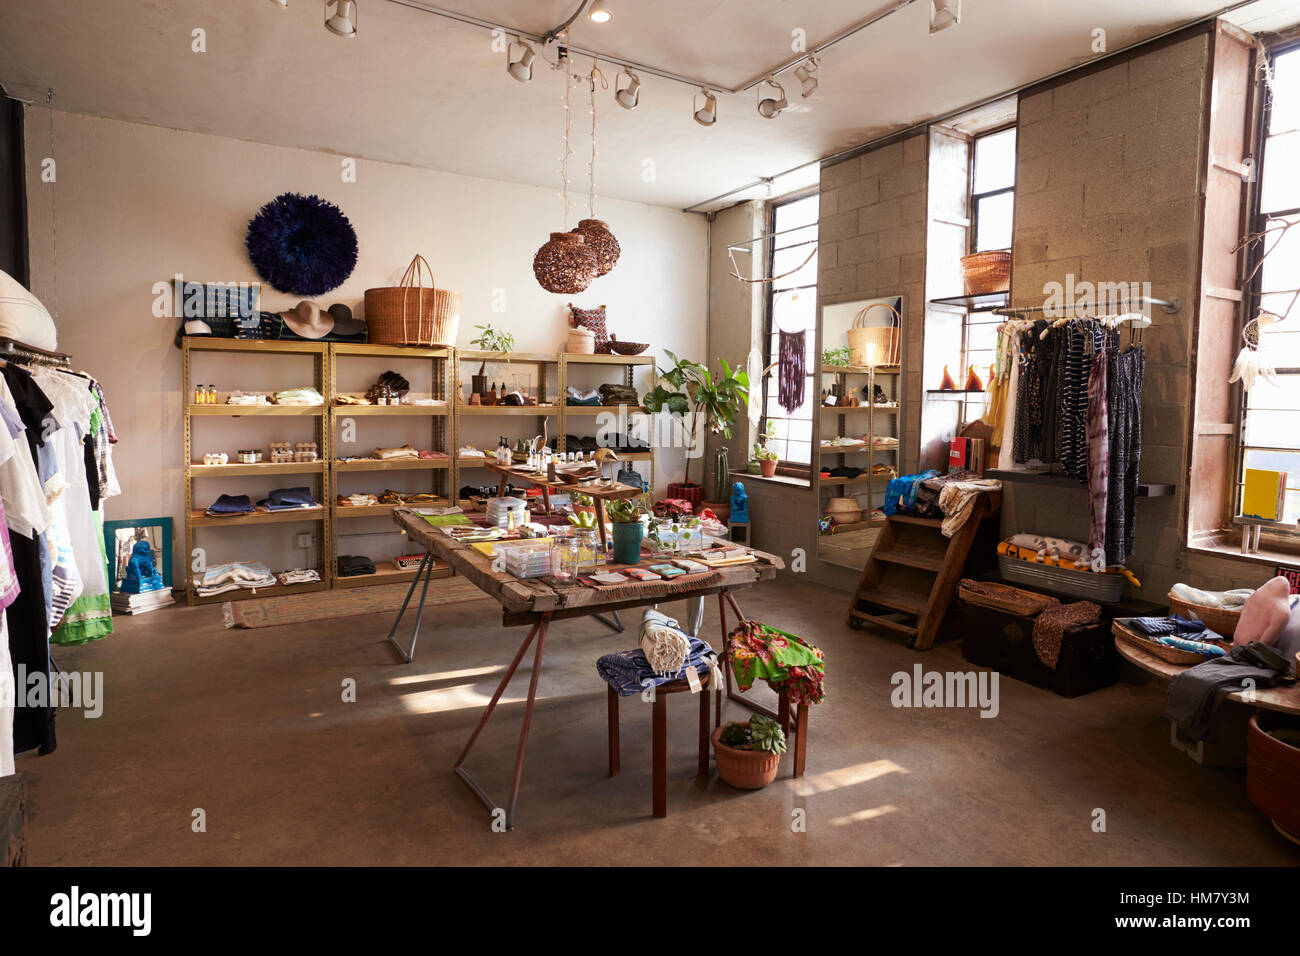 Interior of a shop selling clothes and accessories Stock Photo